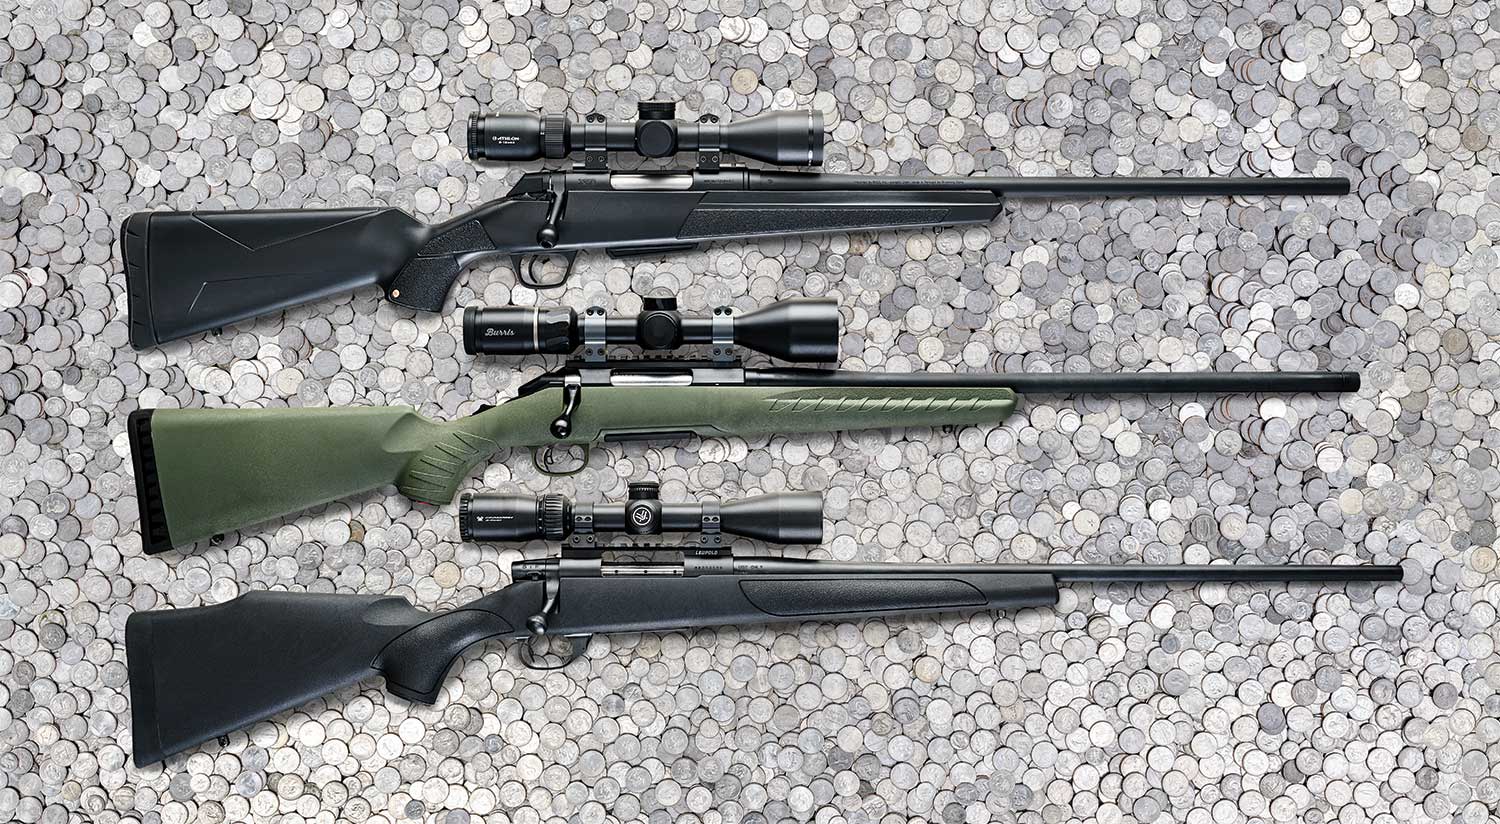 A lineup of three rifles with scopes on a bed of quarters.